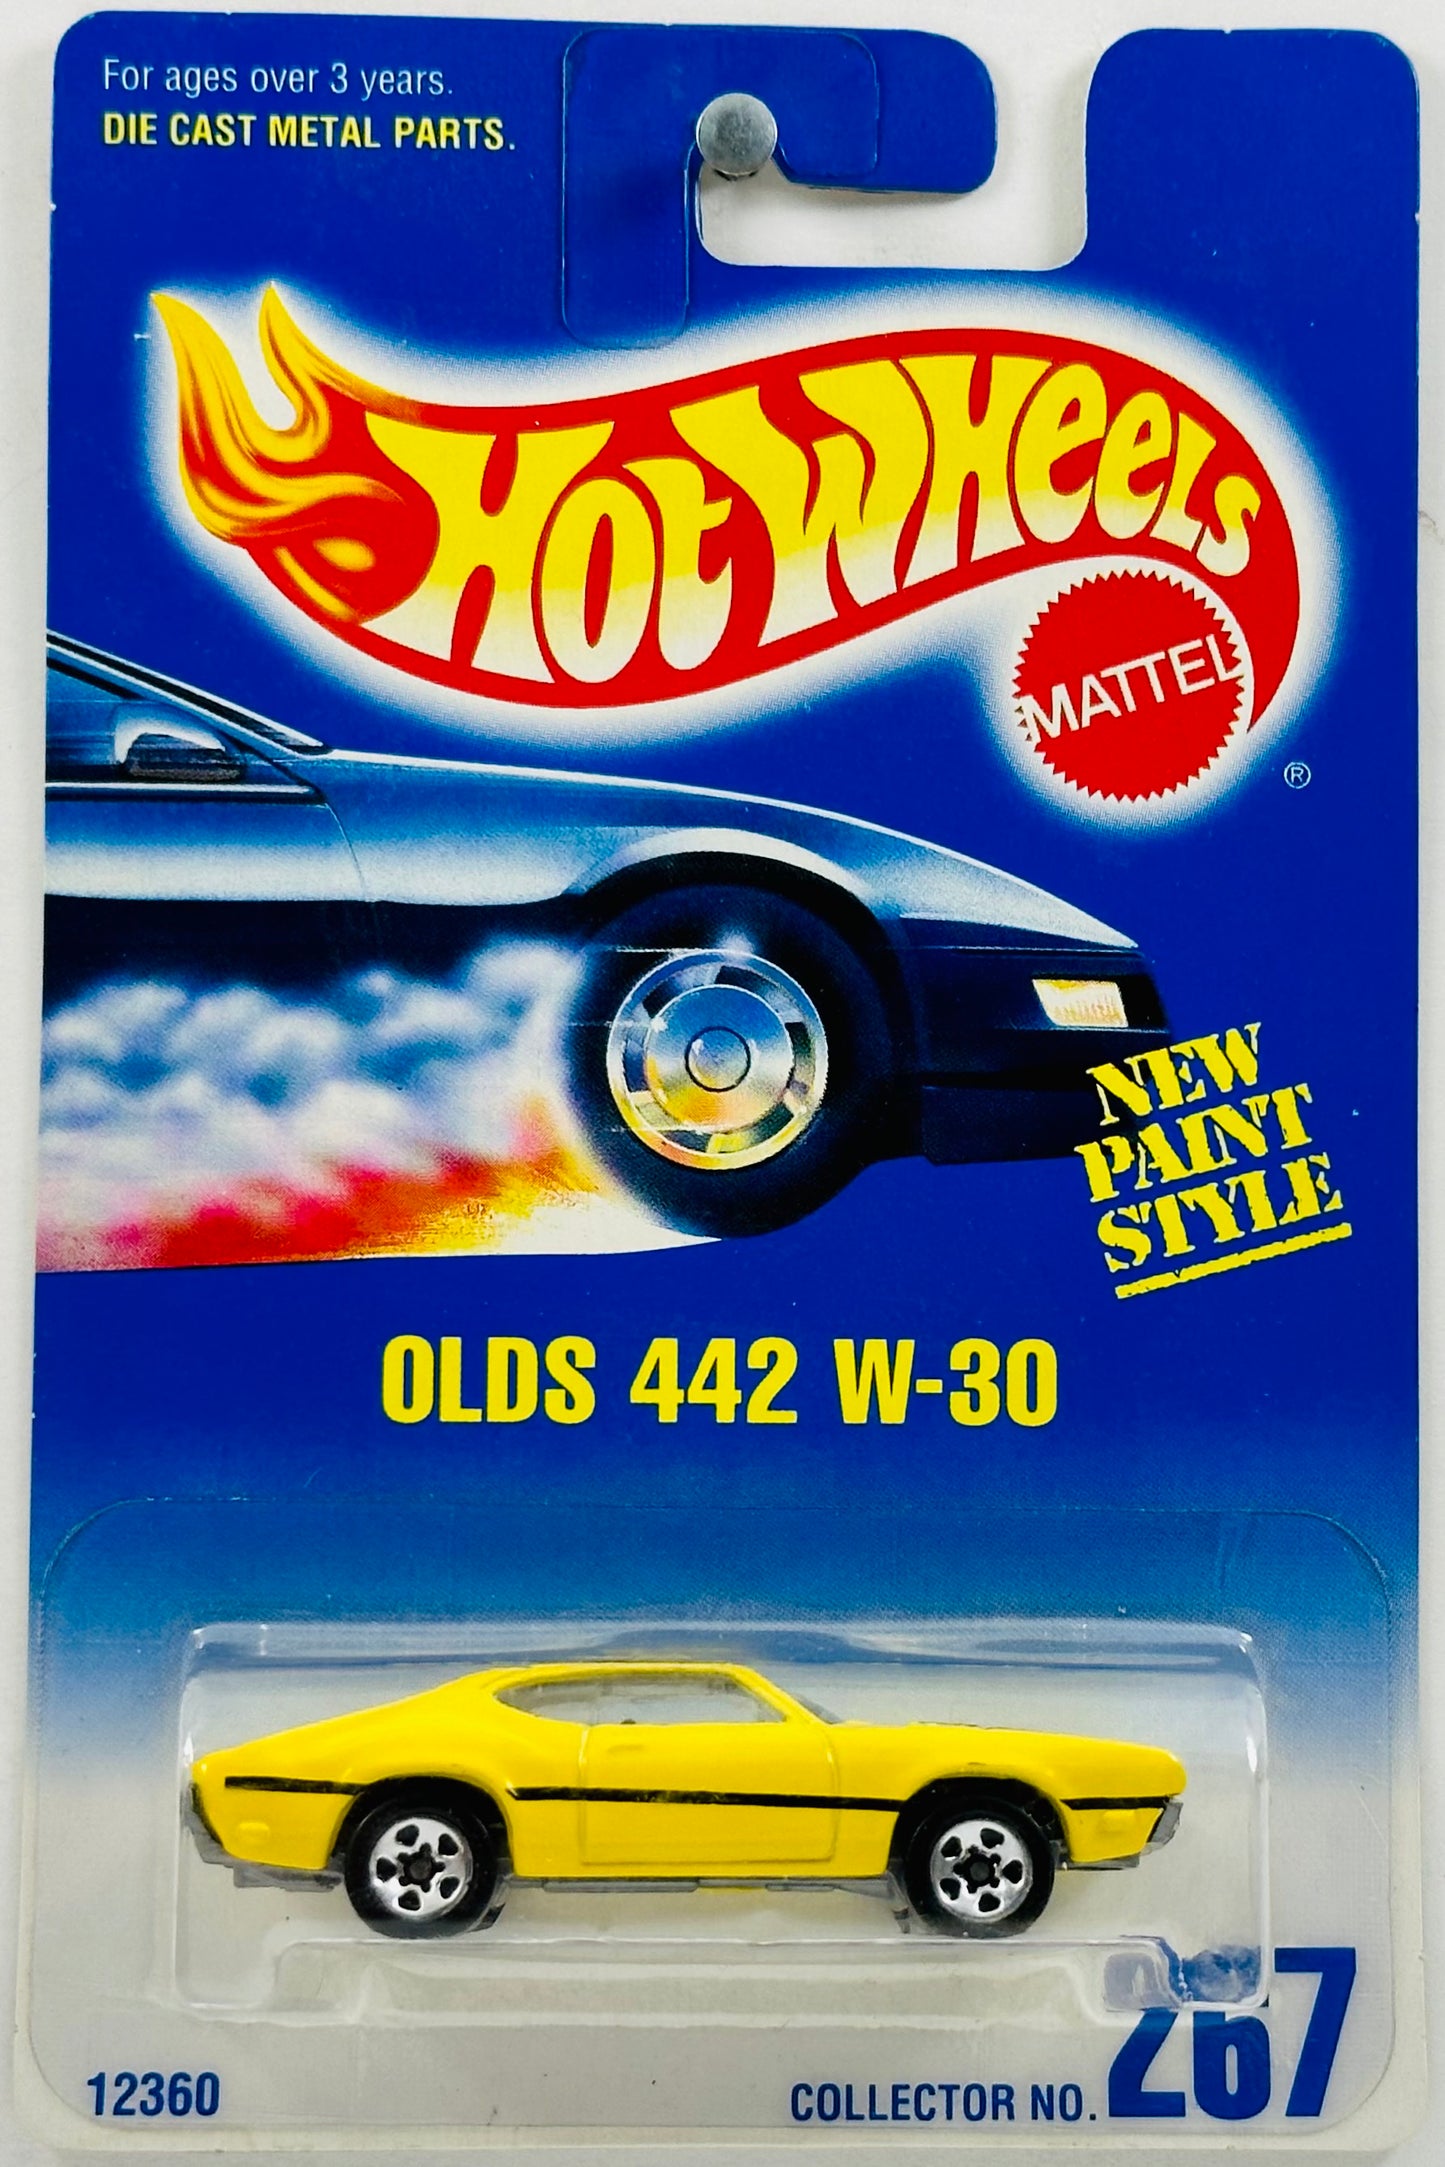 Hot Wheels 1995 - Collector # 267 - New Paint Style - Olds 442 W-30 - Yellow - 5 Spokes - Grey Base - USA Blue & White Card